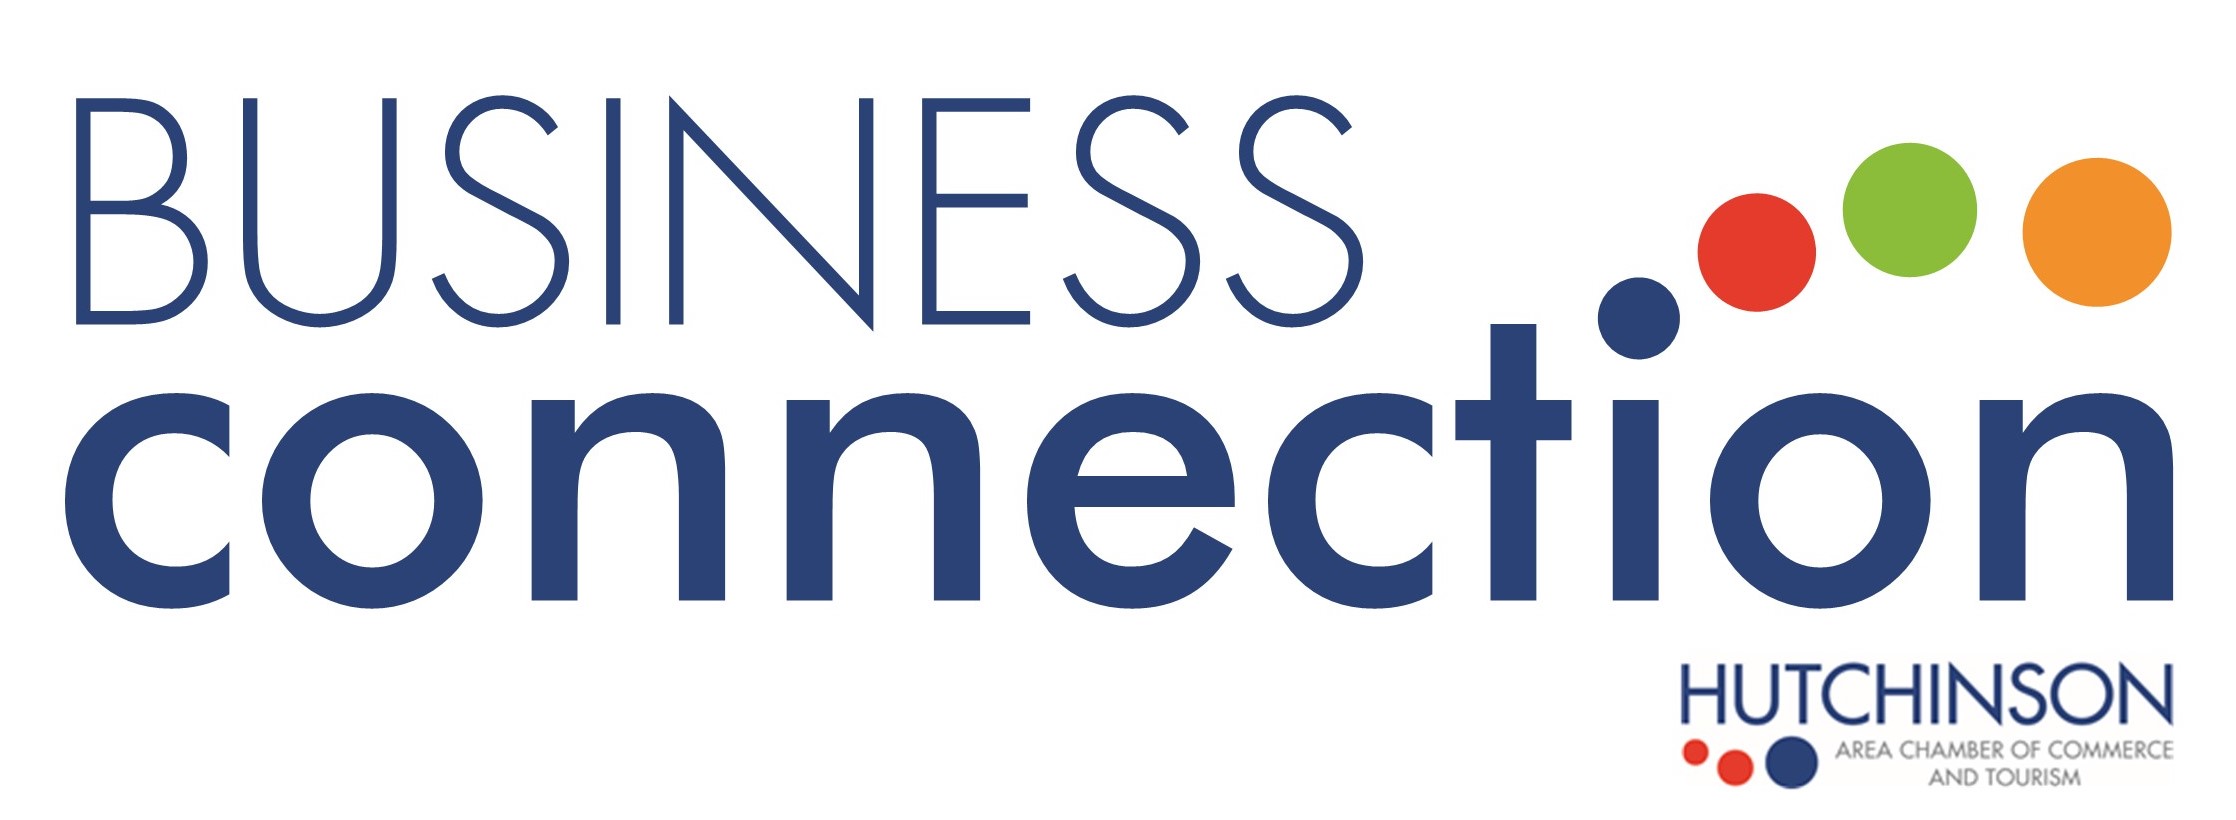 Business Connection logo